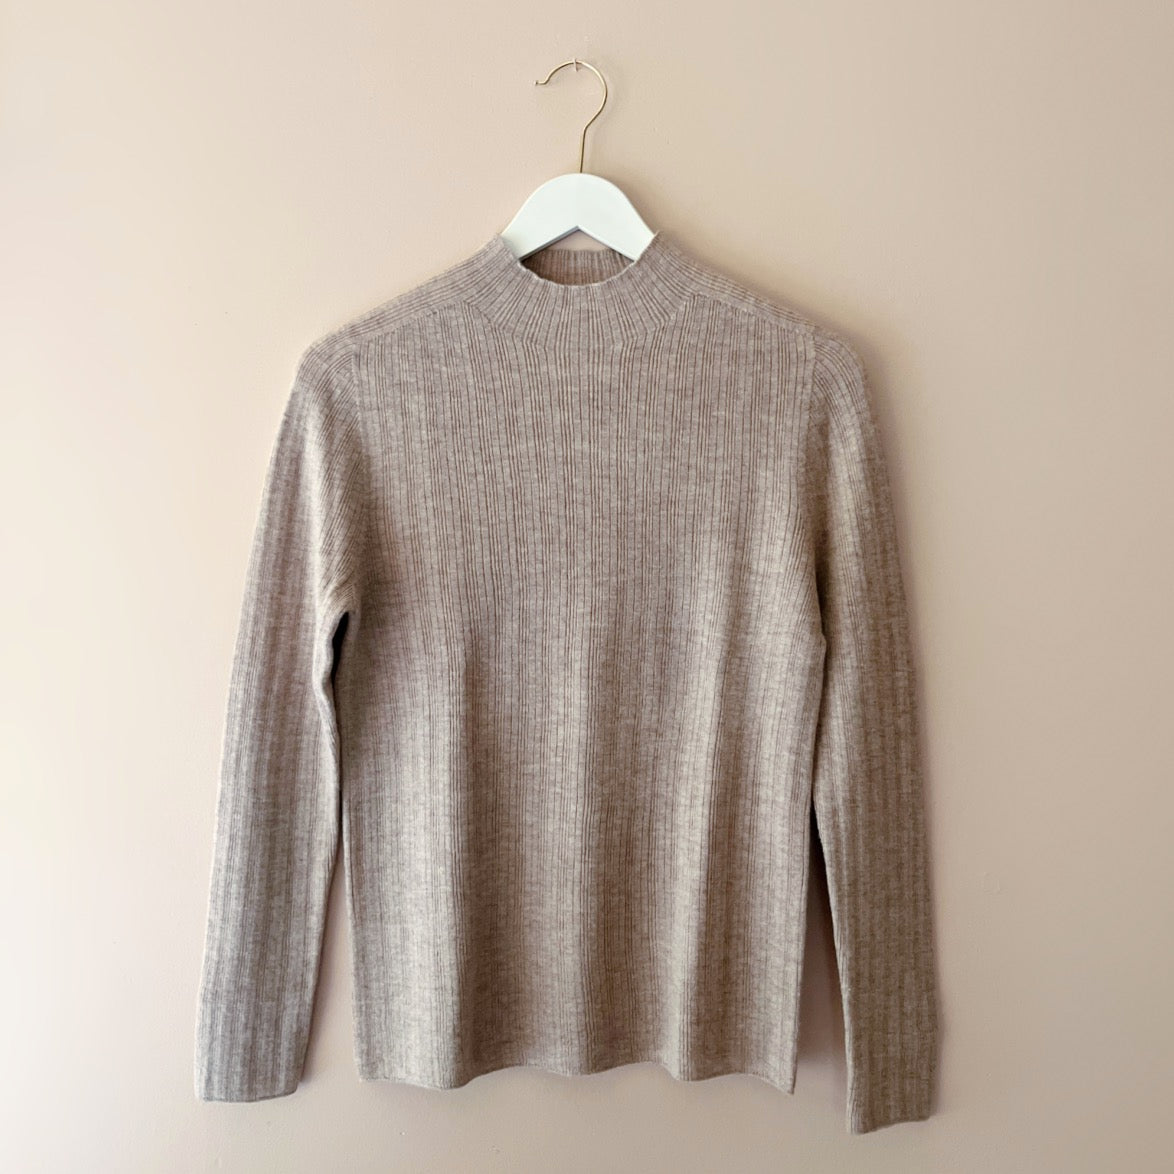 Shop  Women's Top  is a luxurious blend of merino wool and cashmere, providing an exquisite balance of softness and warmth. 